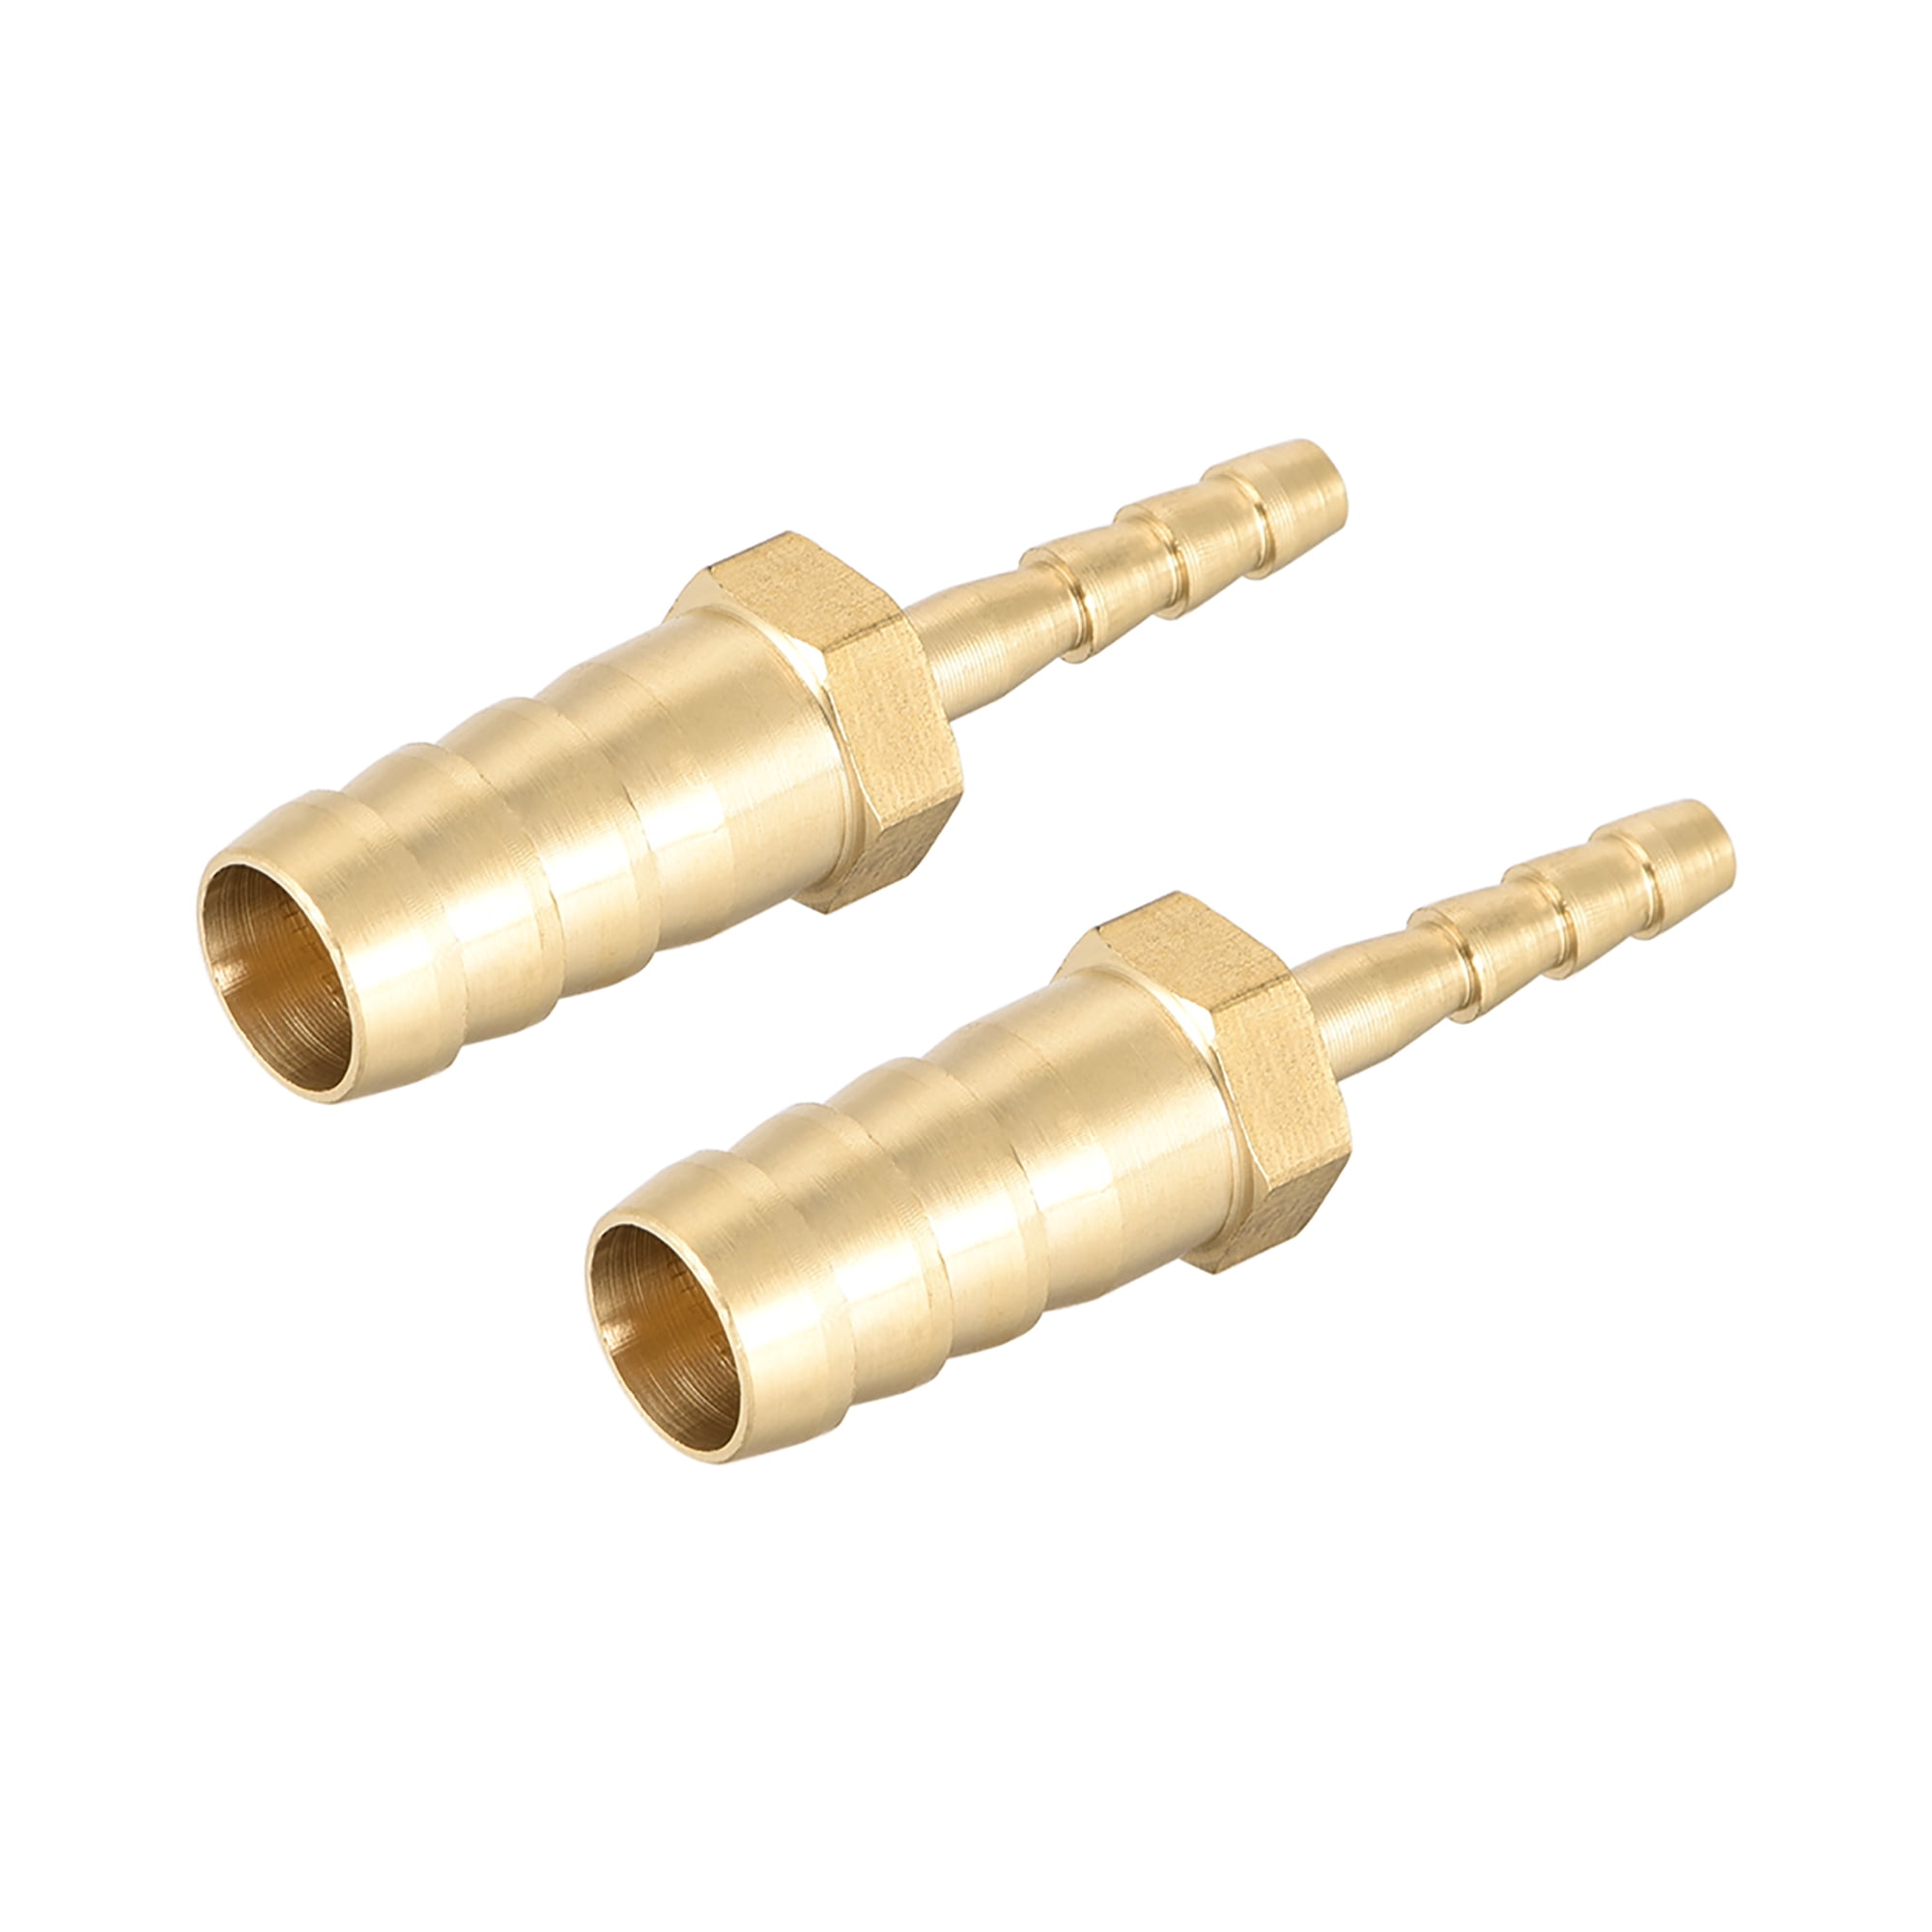 Metric M10x1 Female to M6x1 Male Thread Coupler Brass Connector Fitting Adapter 